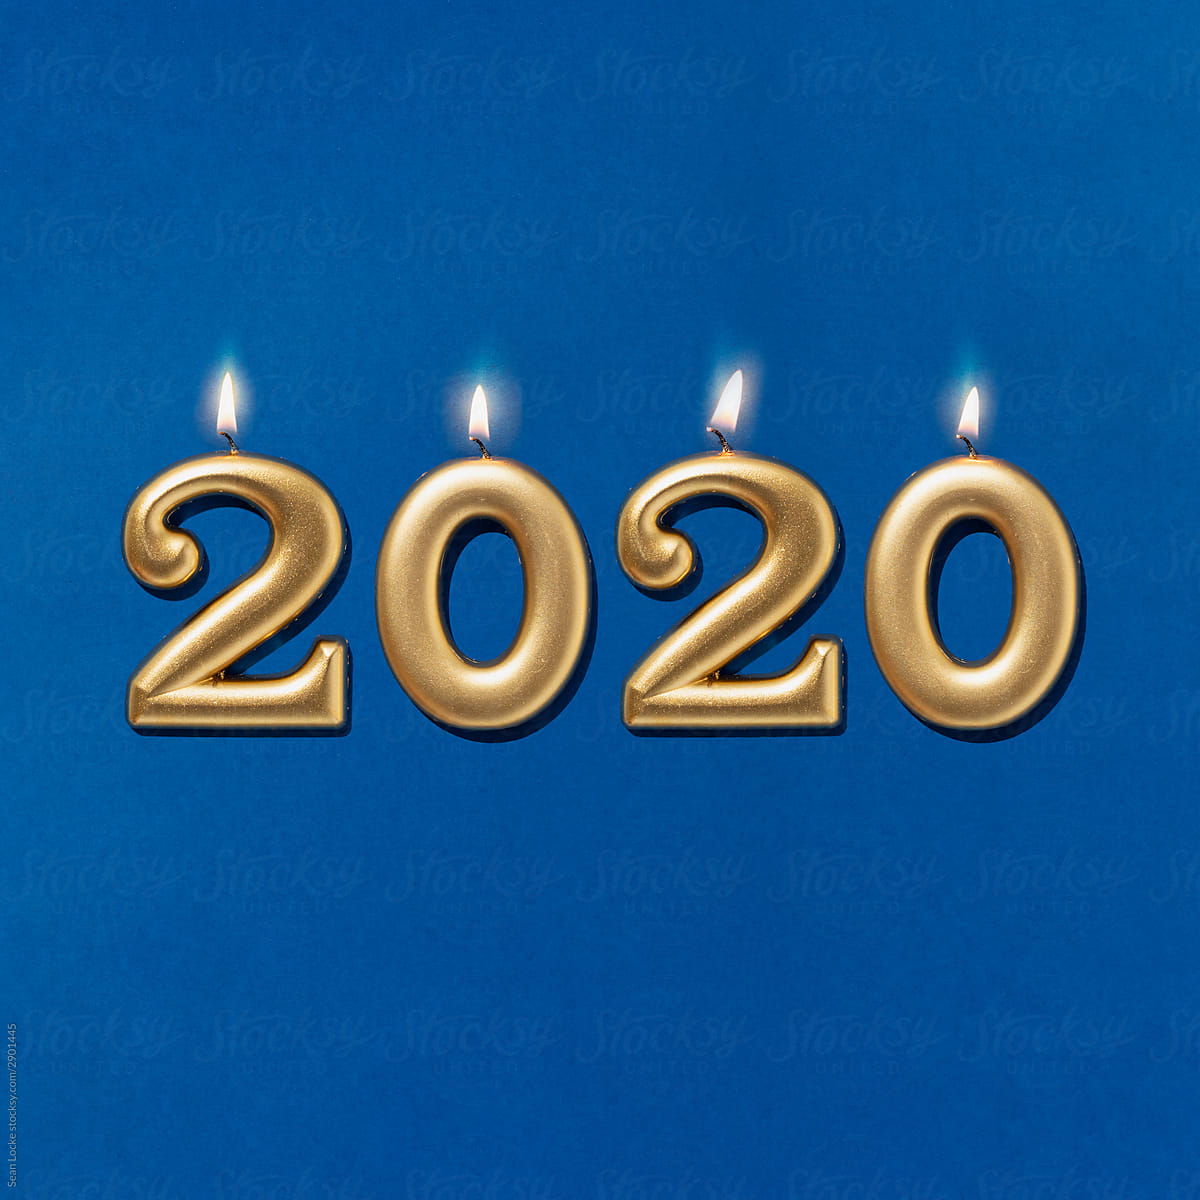 2020 New Year\'s Candles On Classic Blue Background